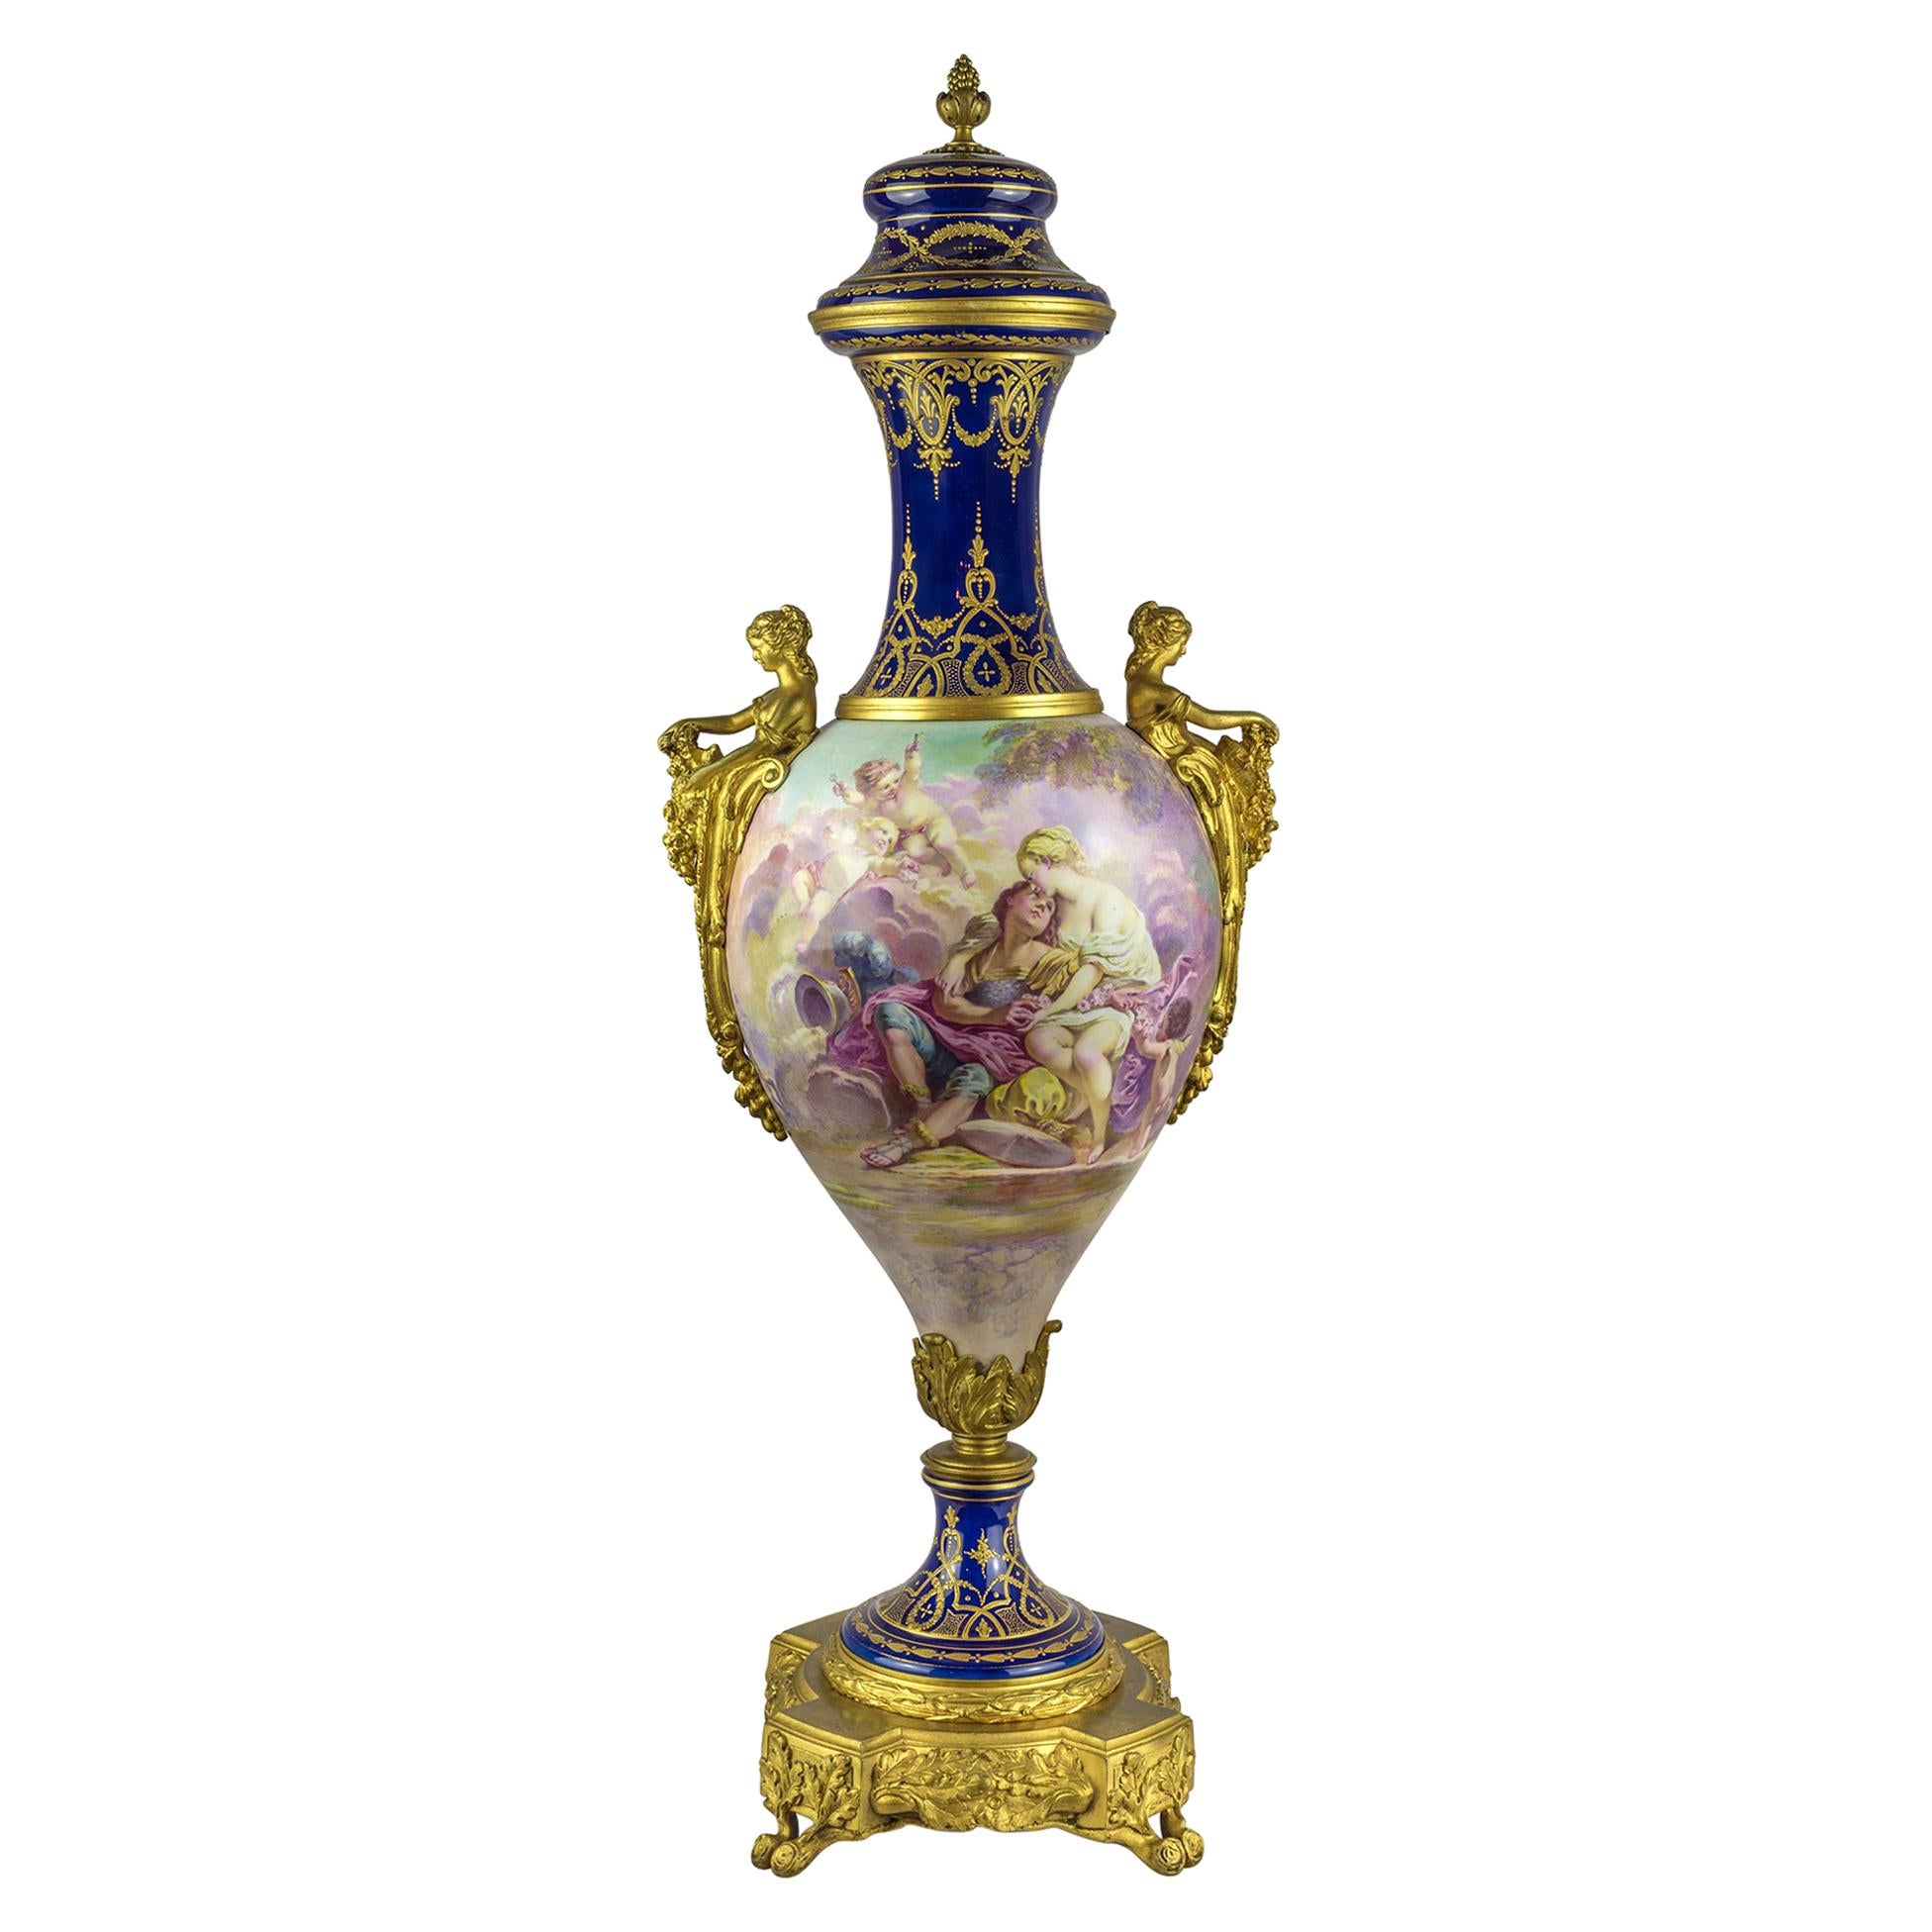 19th Century Sèvres Style Ormolu-Mounted Painted Porcelain Vase